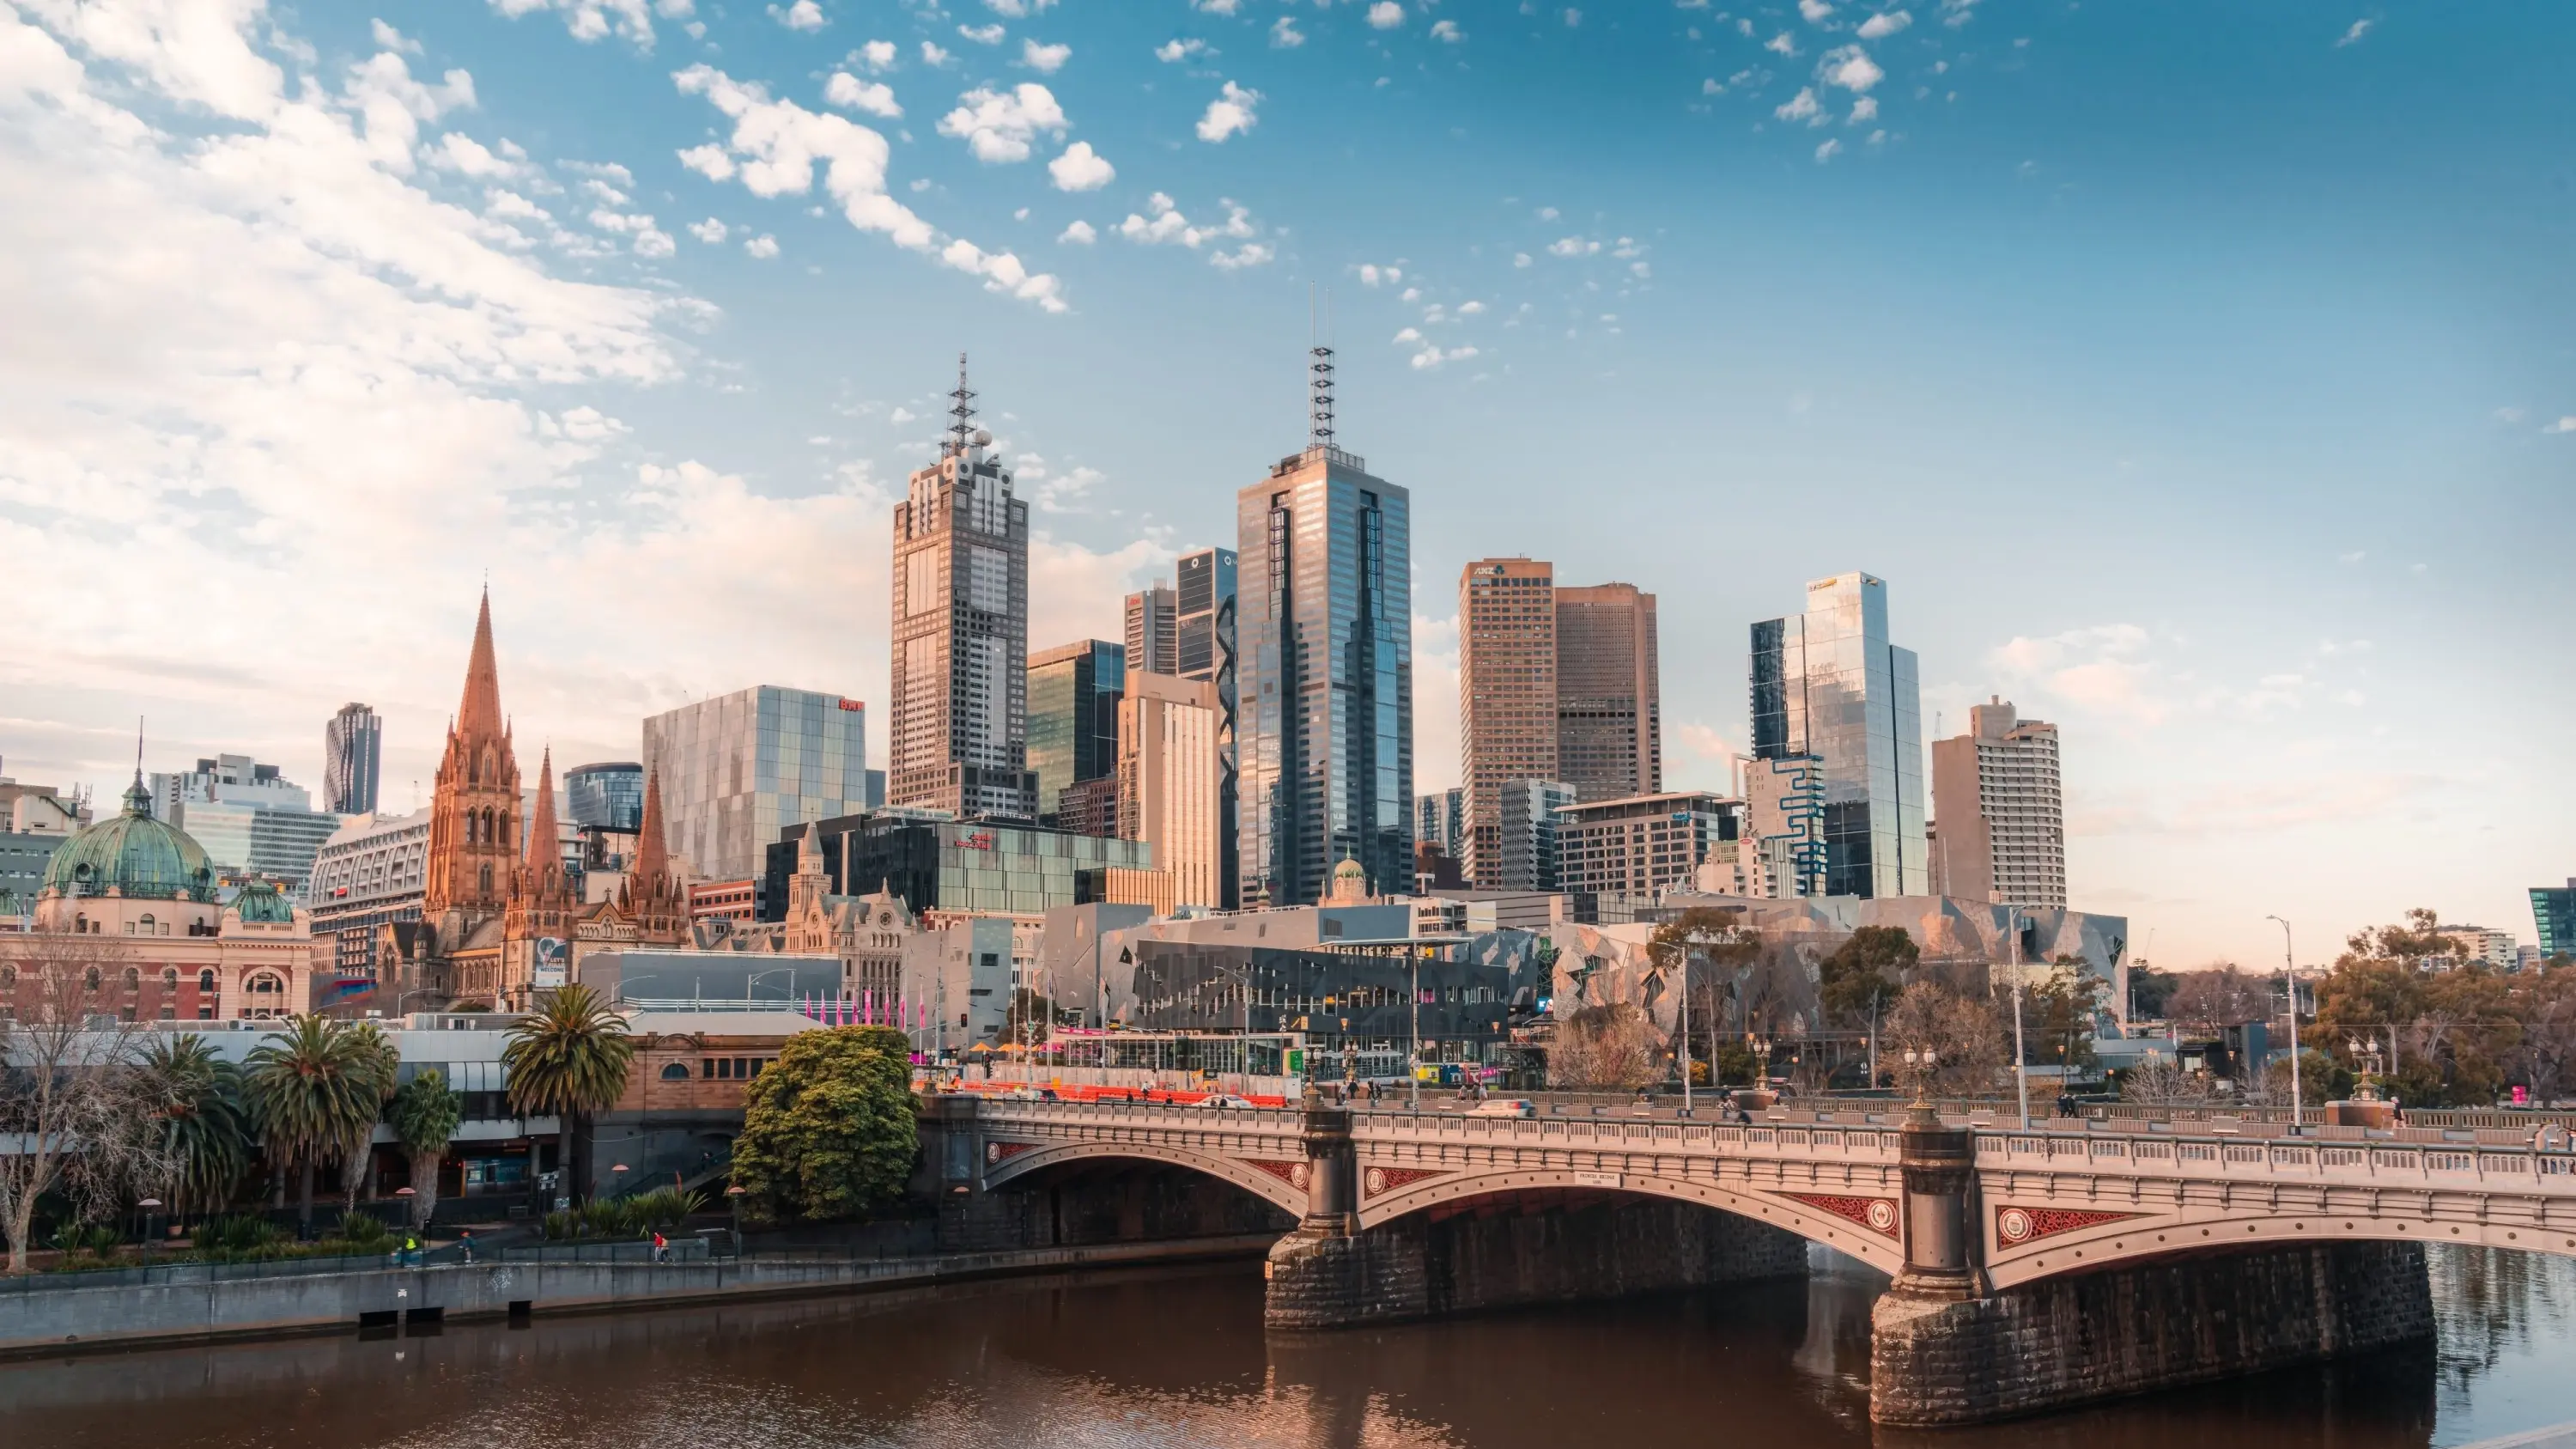 View of the Yarra River, Princess Bridge, Federation Square and the Melbourne CBD skyline from Southbank. Image credit: Visit Victoria